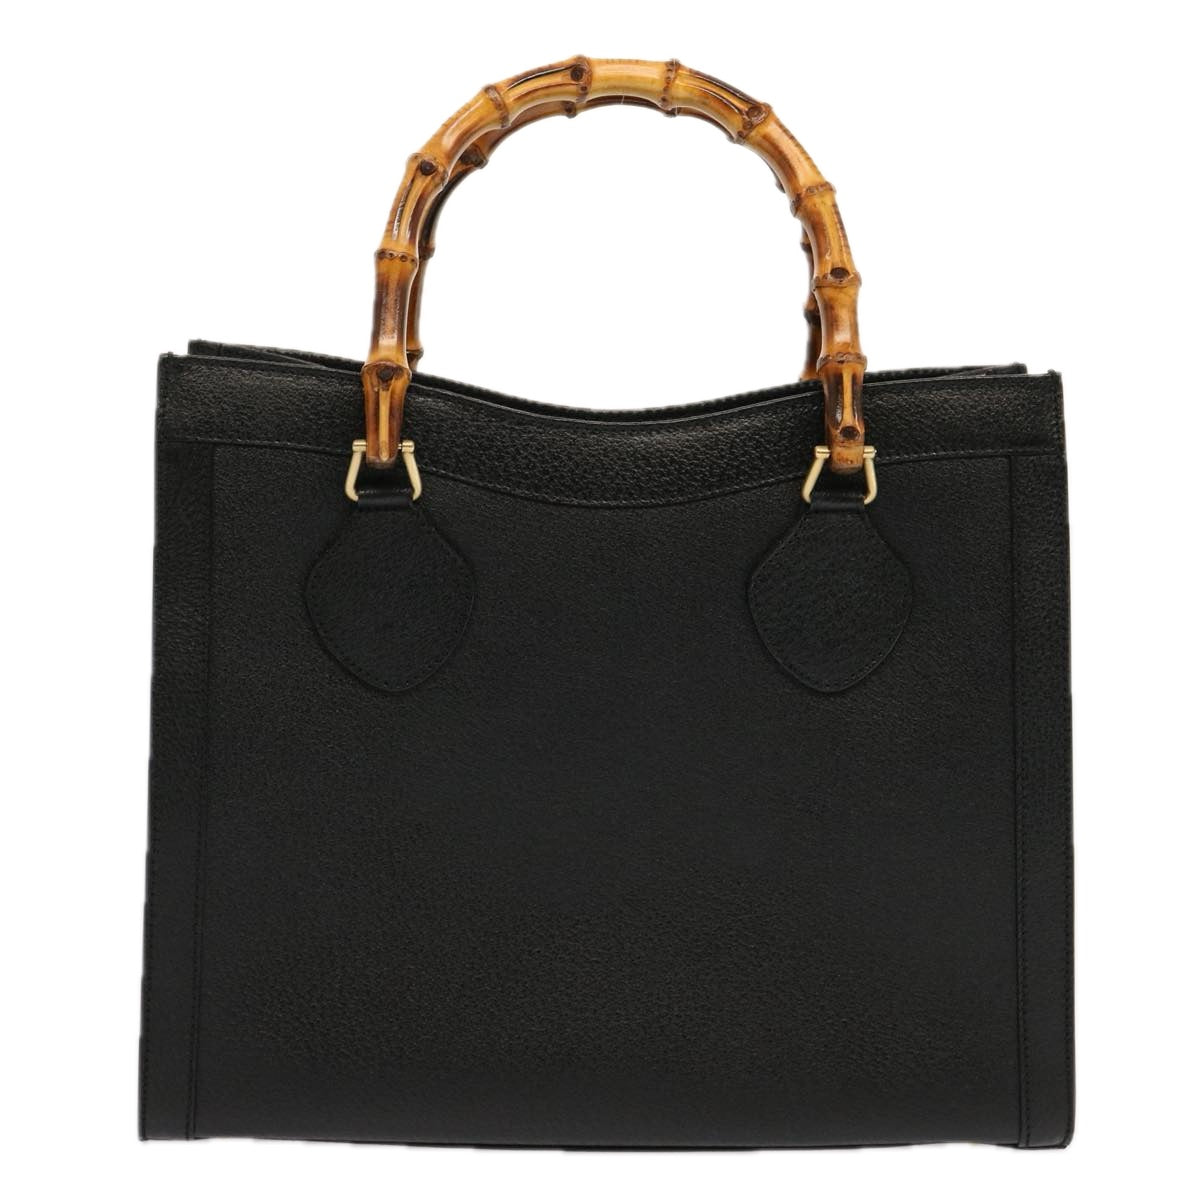 GUCCI Bamboo Tote Bag Leather Black 002 1095 0260 Auth ep3725 - 0